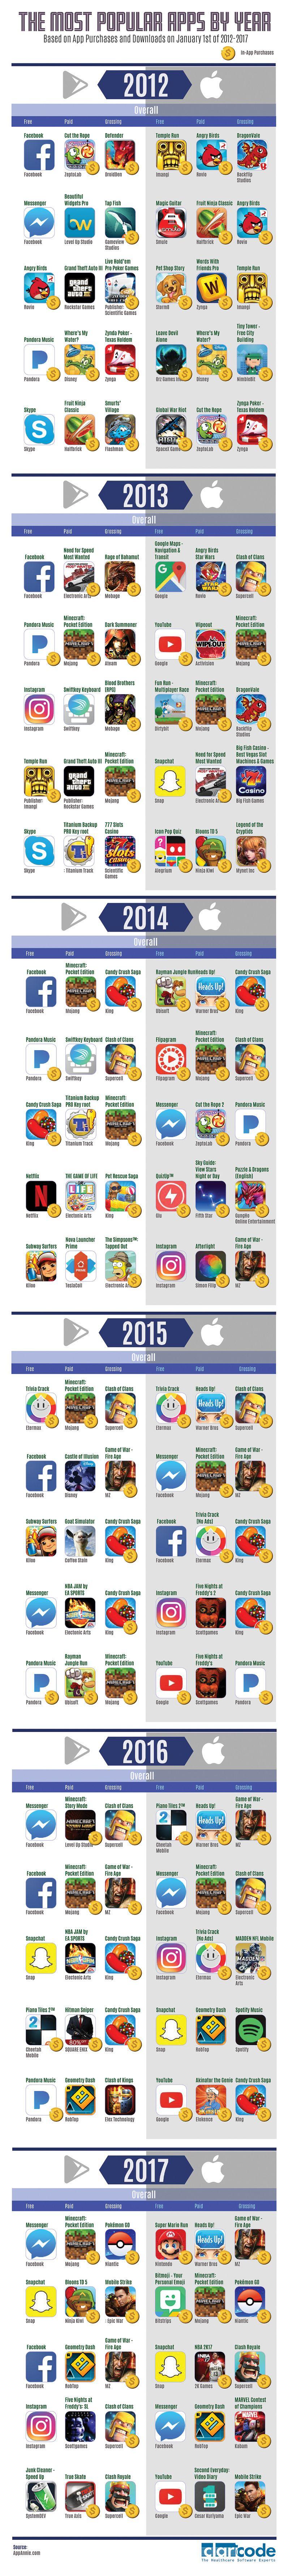 Most Popular Mobile Apps Logo - The Most Popular Mobile Apps by Year from 2012-2017 (based on app ...